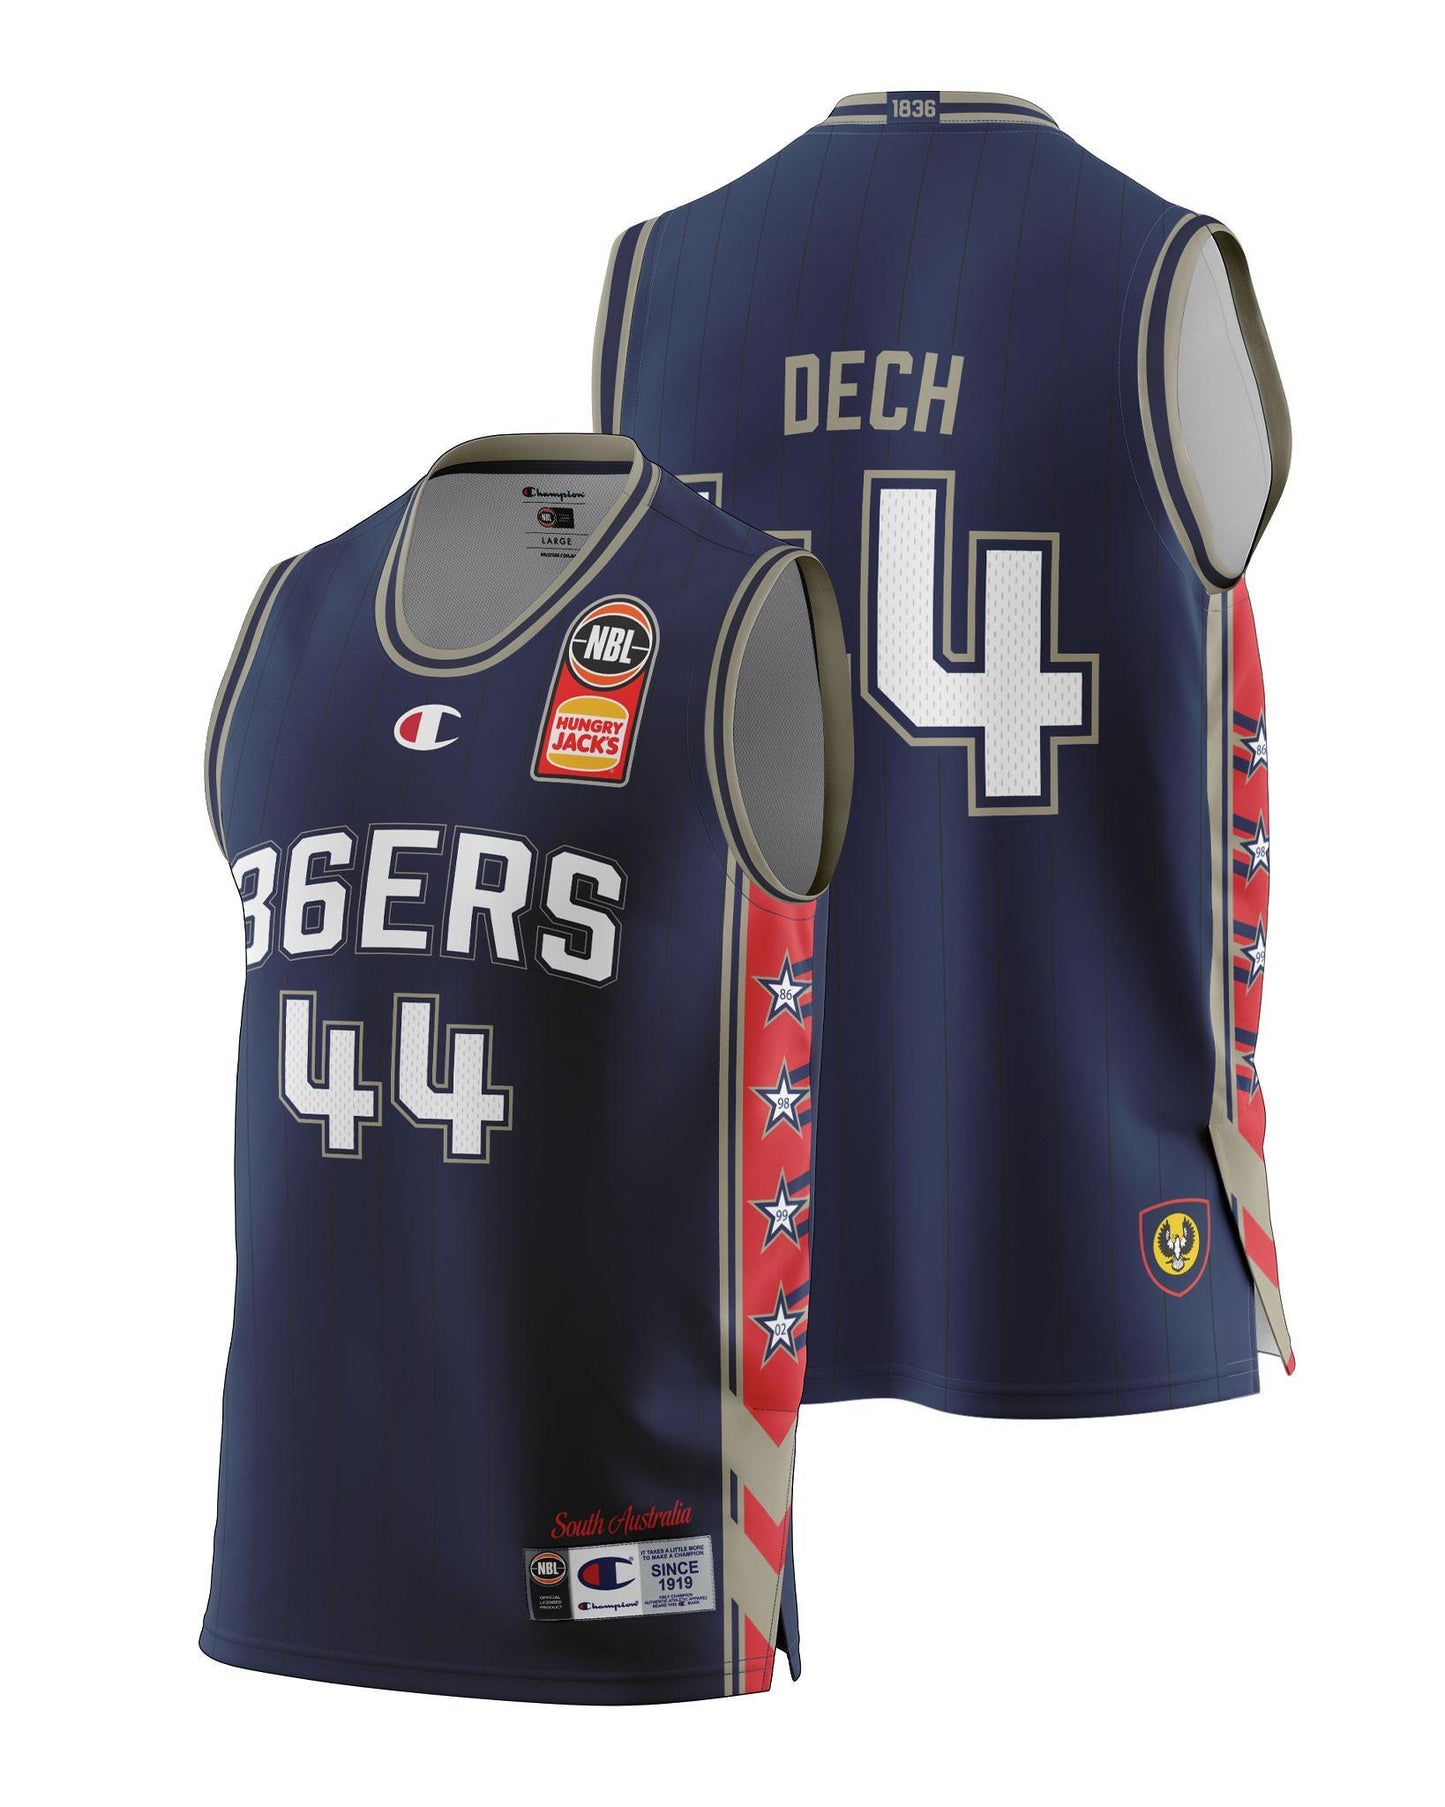 Adelaide 36ers 2021/22 Authentic Adult Home Jersey - Sunday Dech